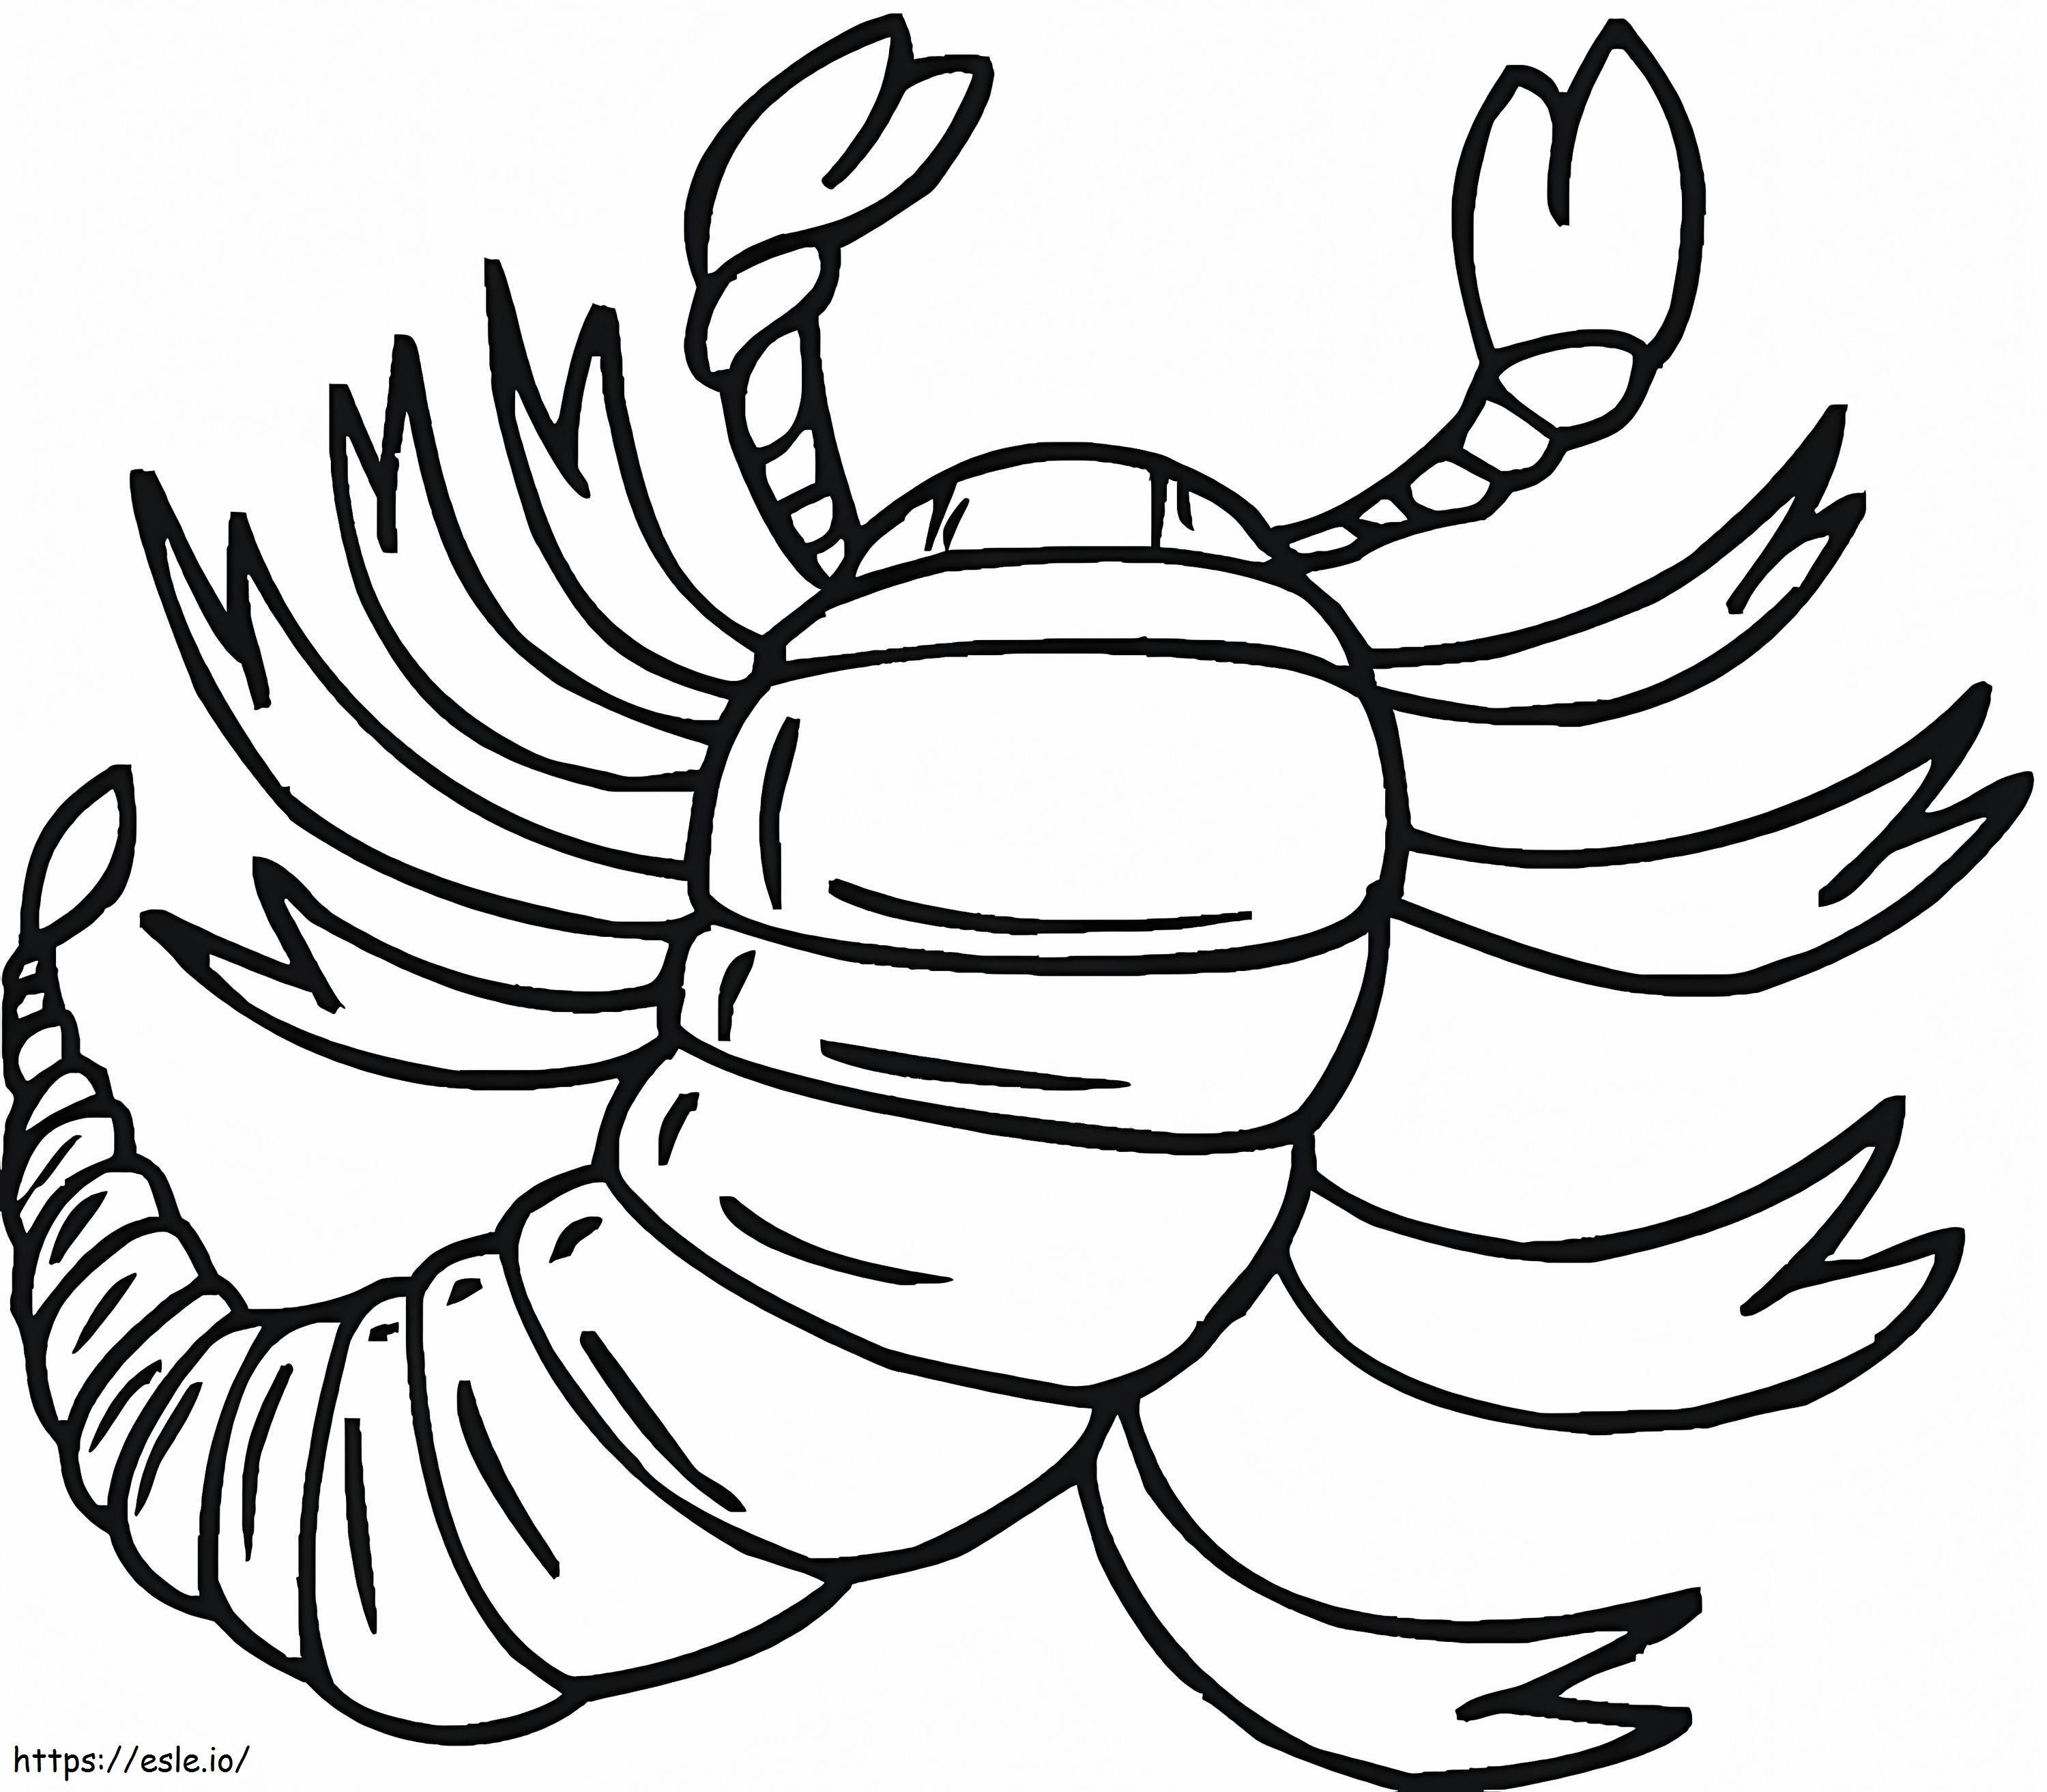 Scorpion 9 coloring page